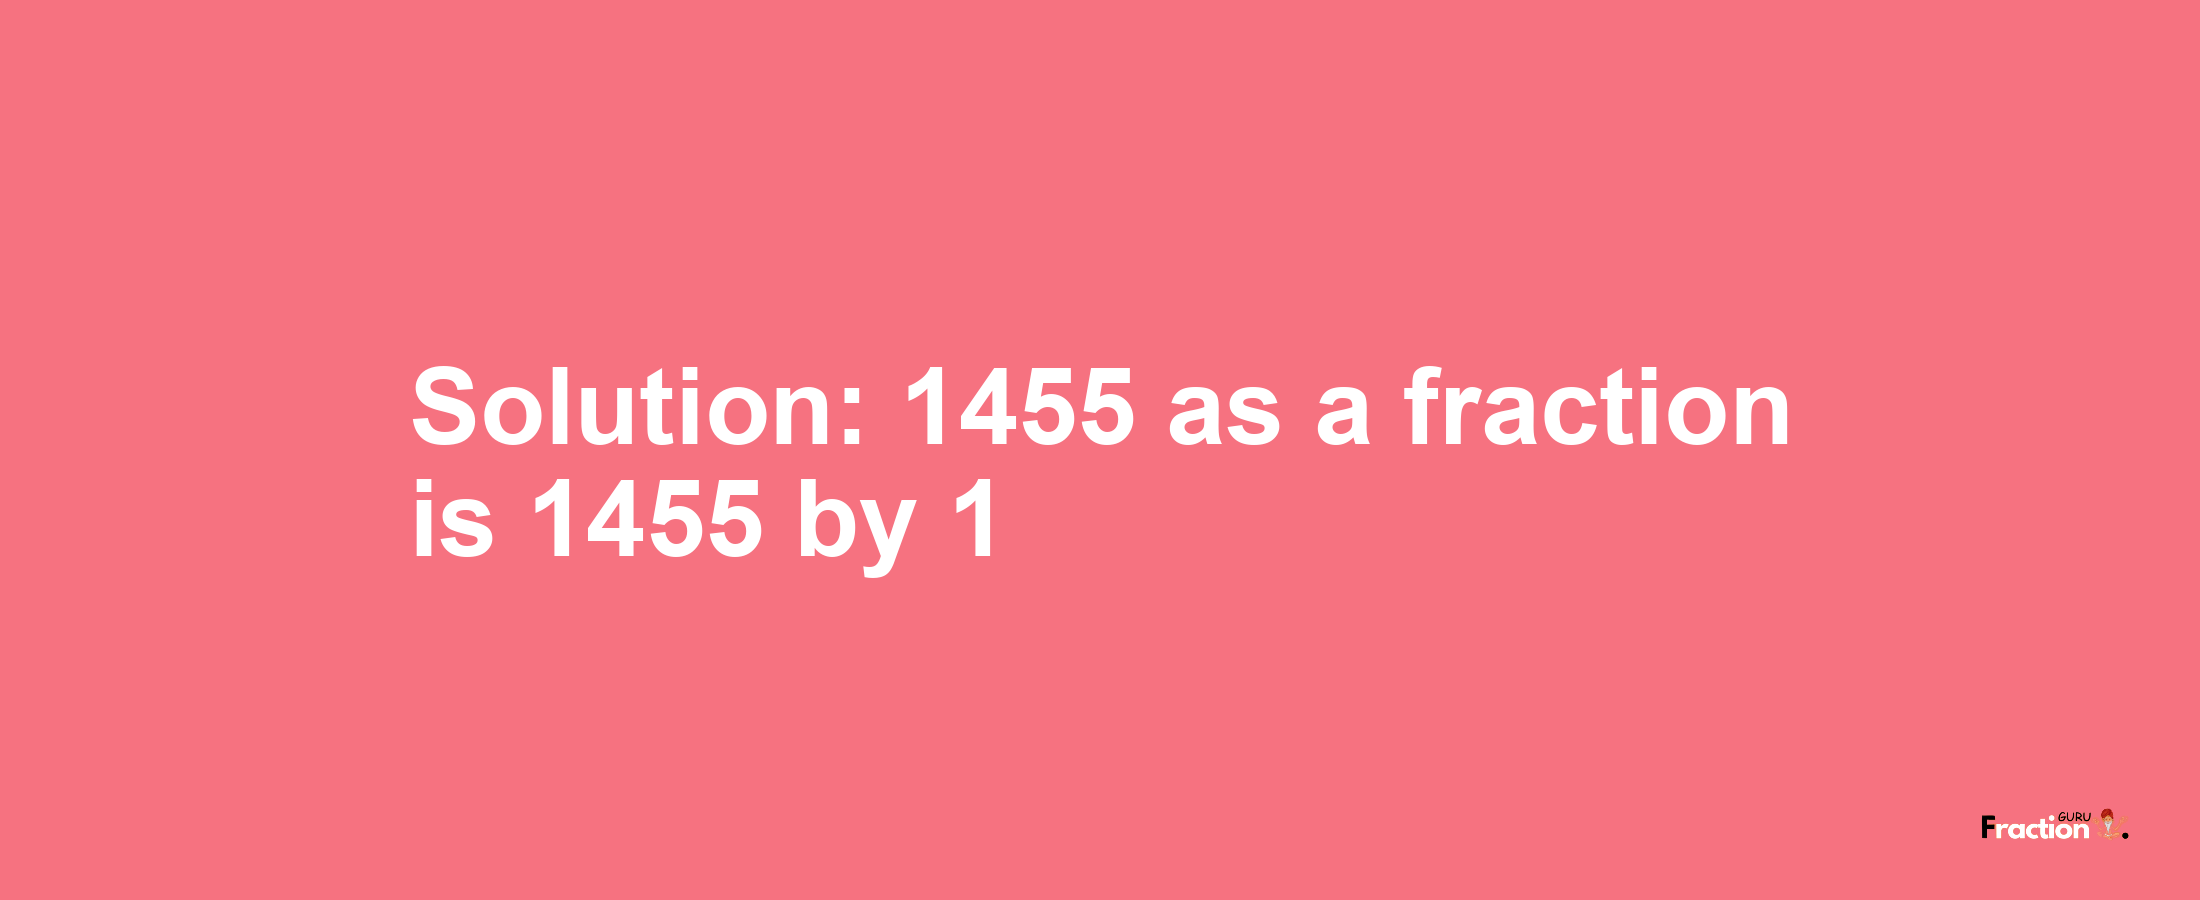 Solution:1455 as a fraction is 1455/1